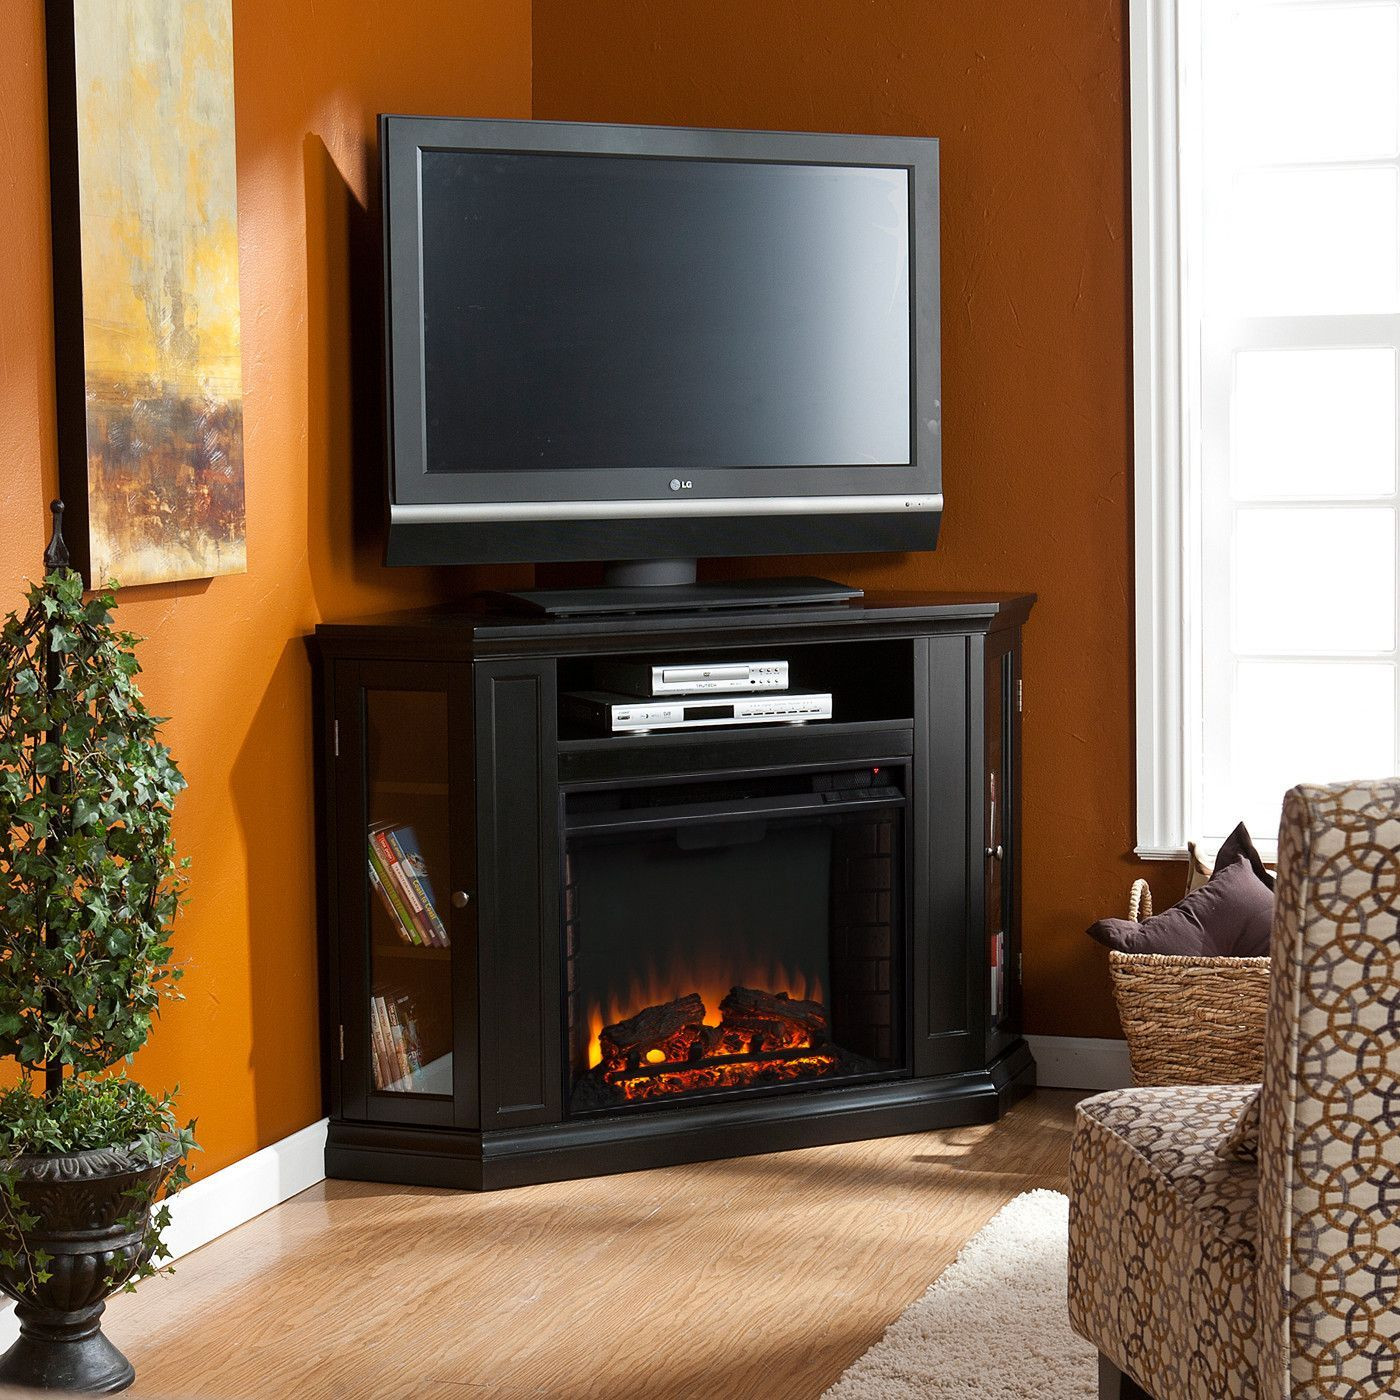 Bobs Furniture Electric Fireplace
 Oyster Bay Electric Fireplace with TV Stand